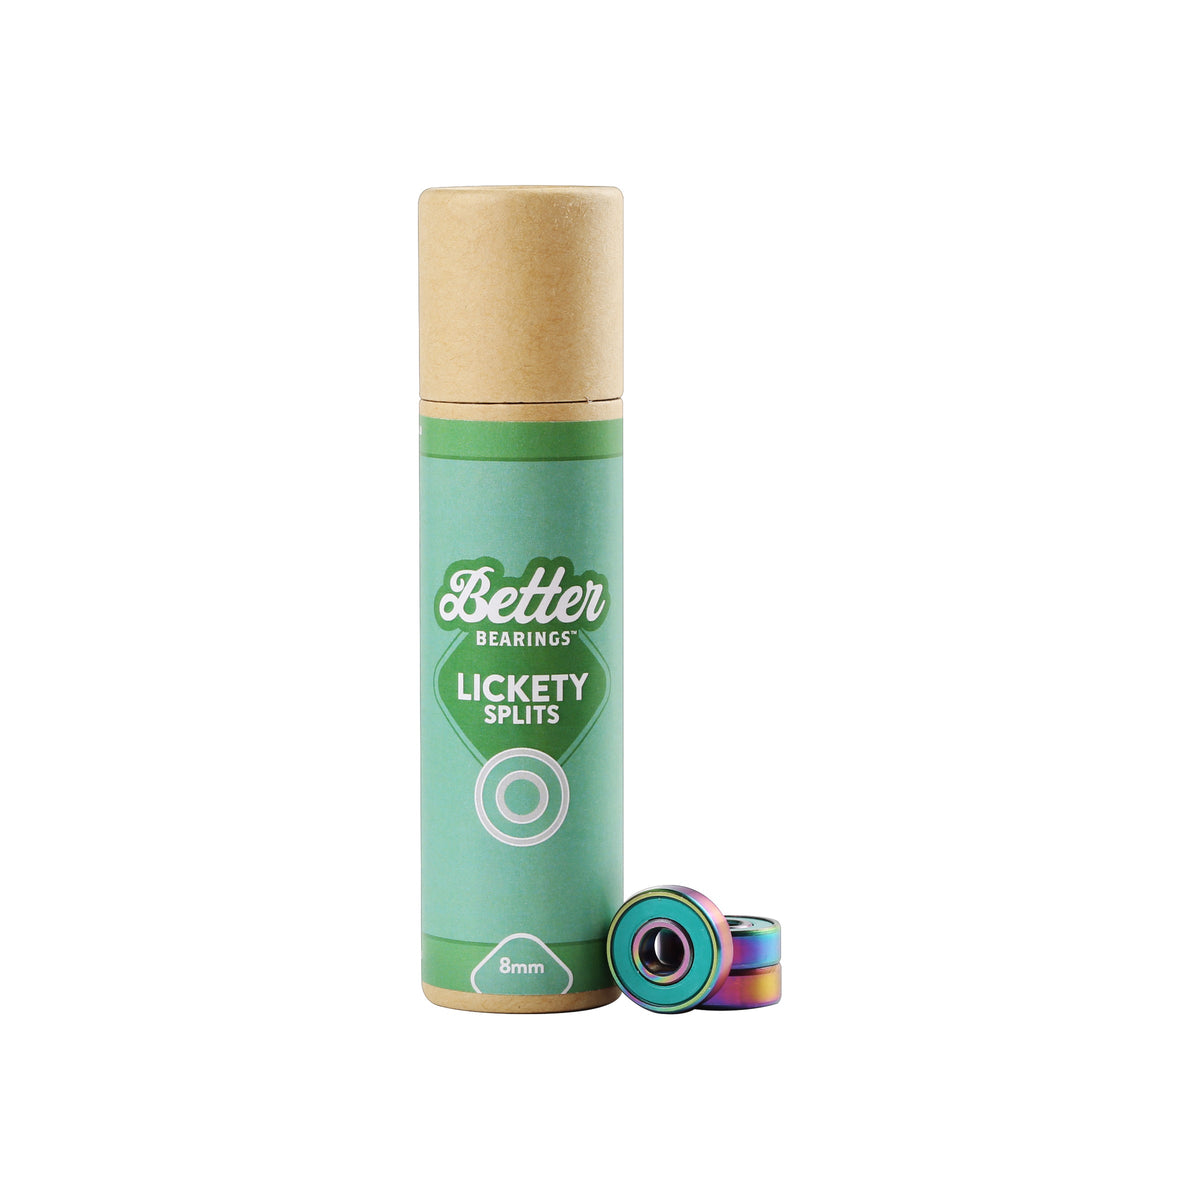 Better Bearings Lickety Splits 8mm 16pk Teal Inline and Quad Bearings